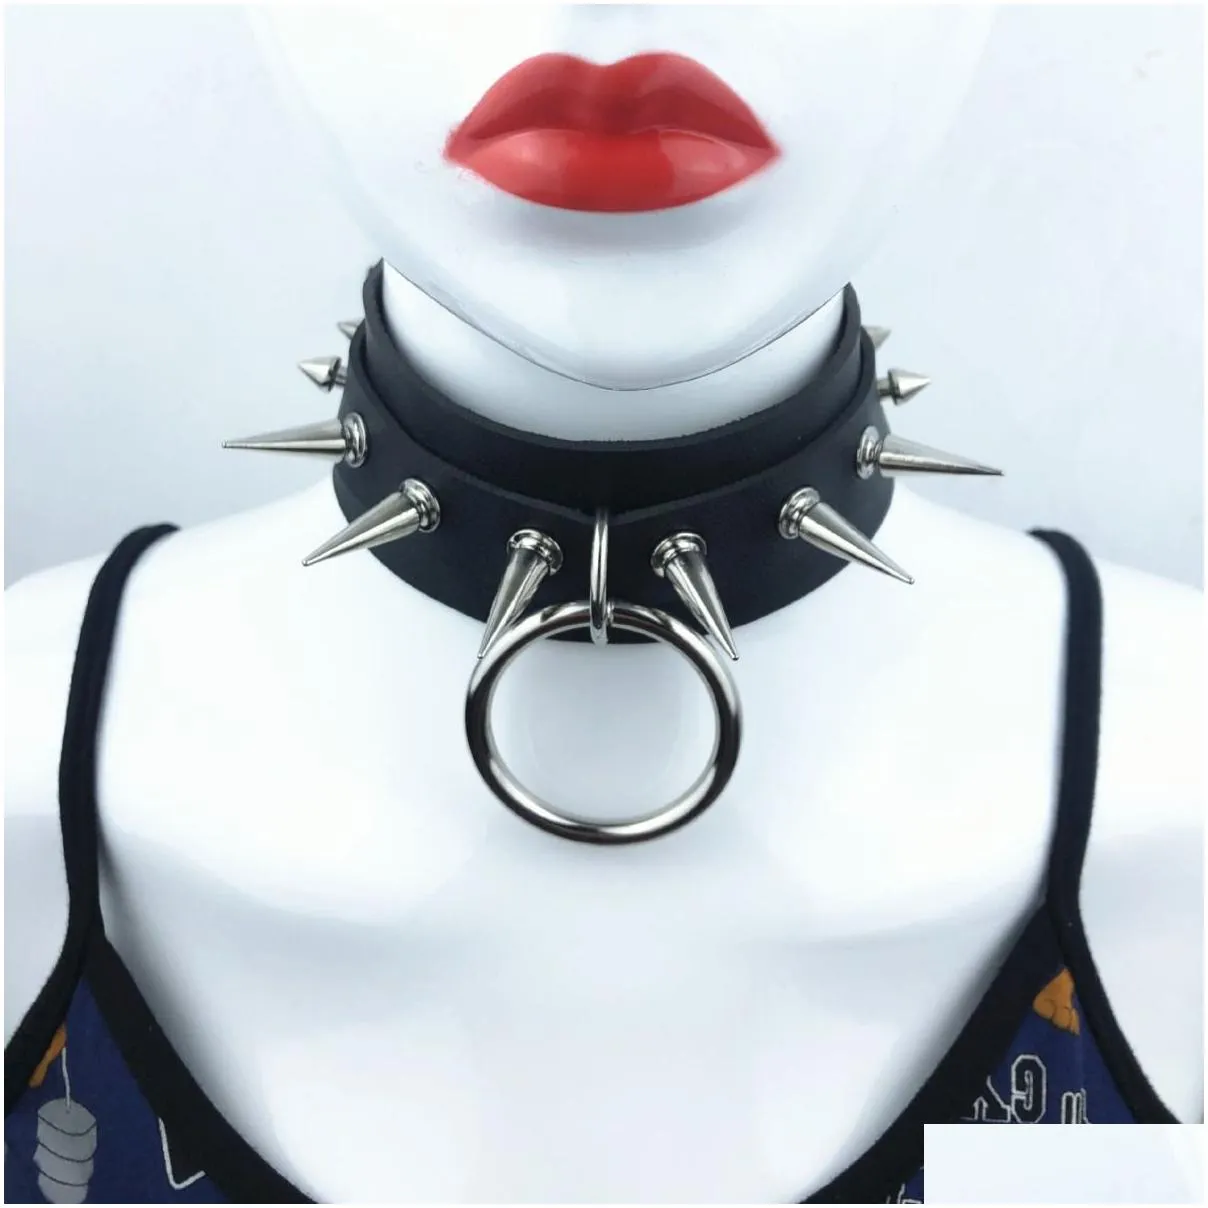 Chokers Gothic Black Spiked Punk Choker Collar Spikes Rivets Studded Chocker Necklace For Women Men Bondage Cosplay Goth Je Dhgarden